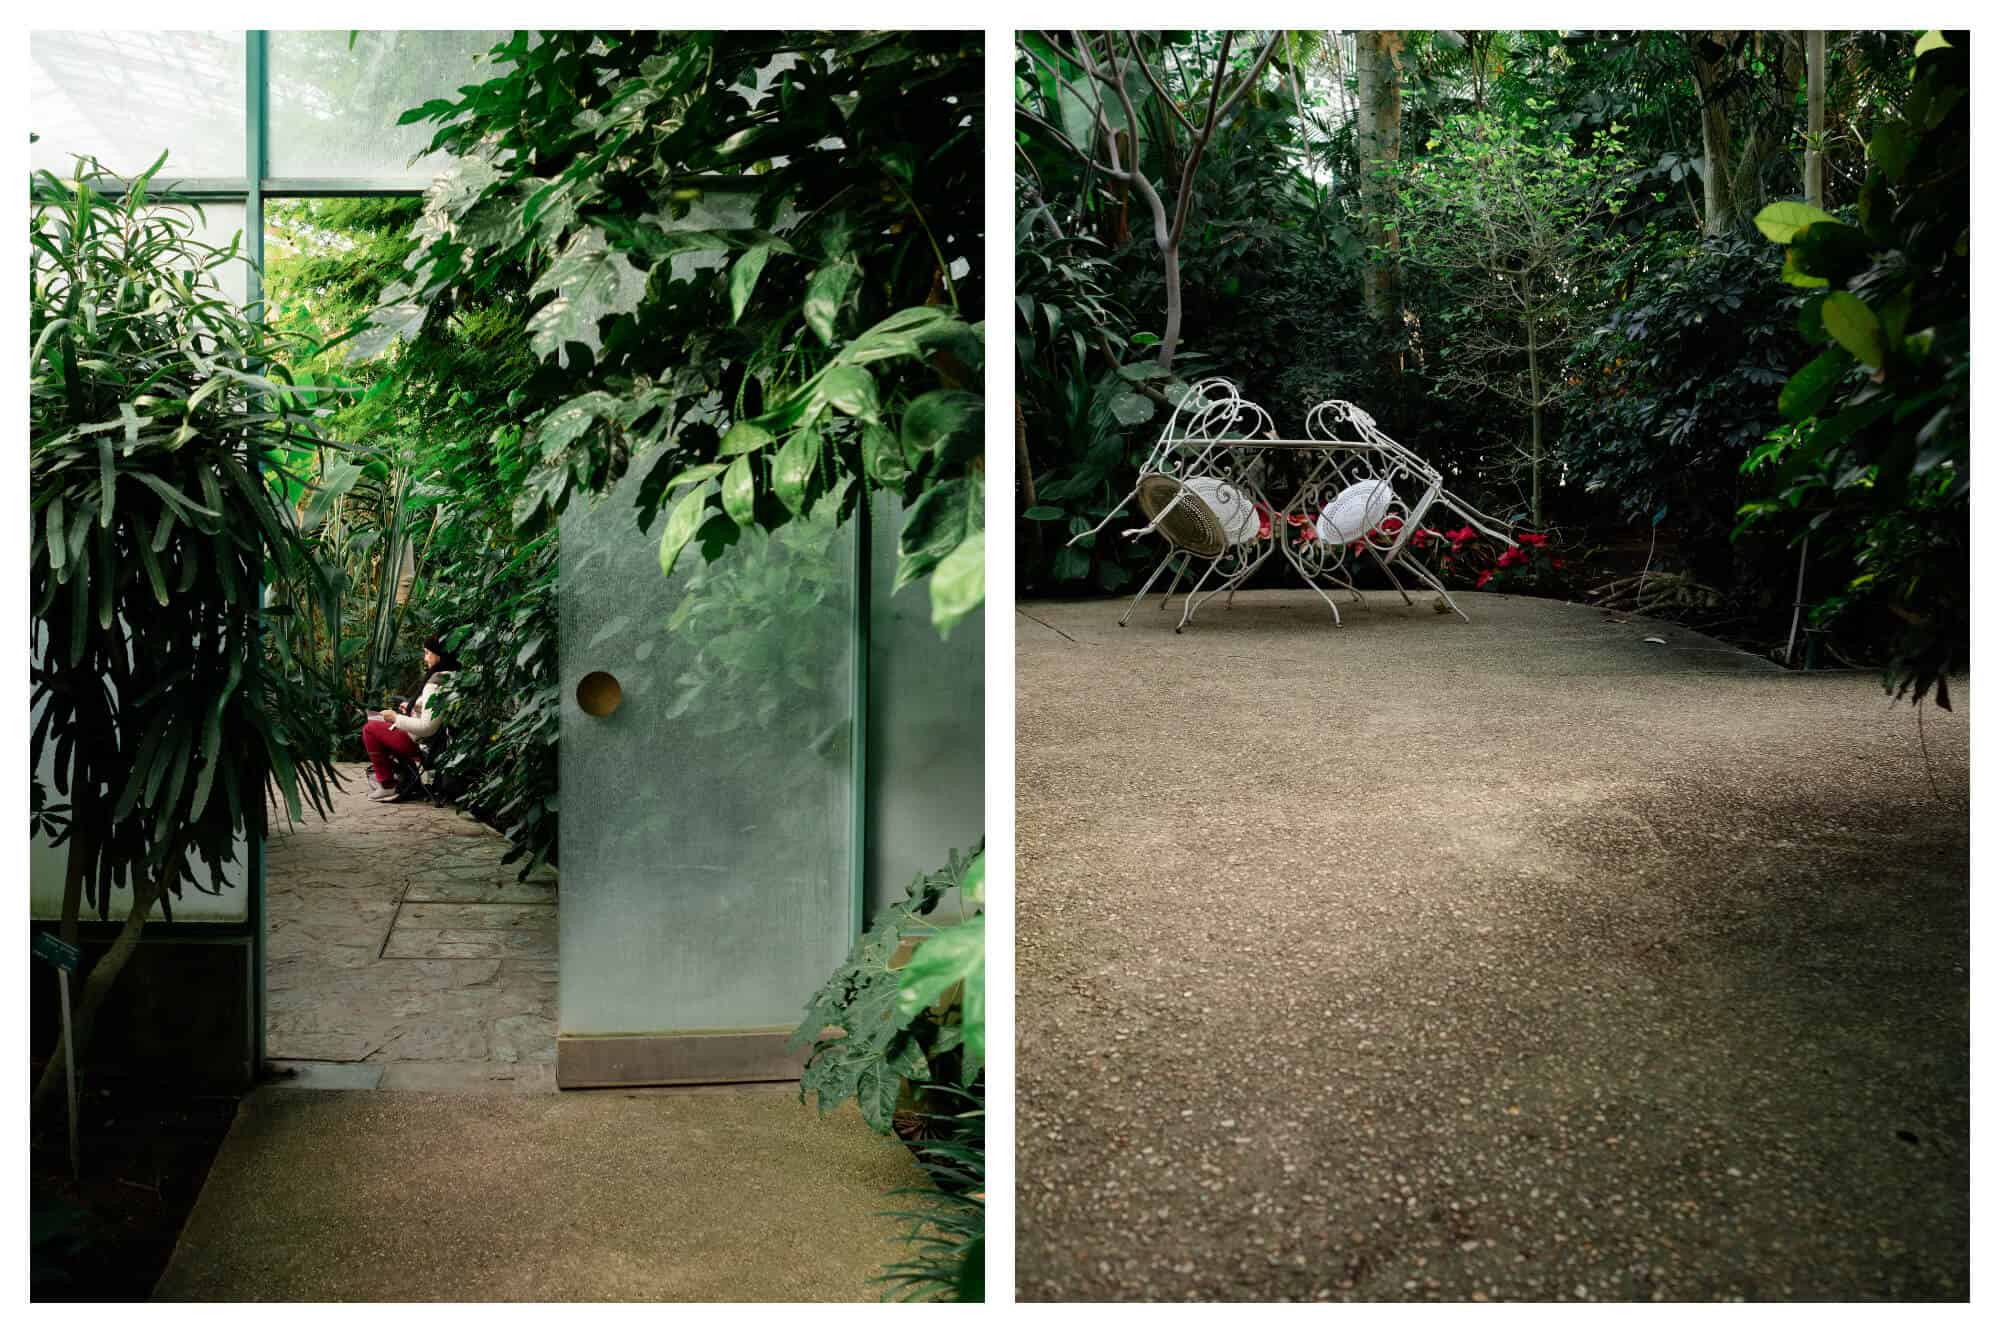 On left: An artist sits among the leaves of the Serres d'Auteuil, in Paris' 16th arrondissement, sketching. On right: Empty chairs are propped up on their table on the patio in the main greenhouse of the Serres d'Auteuil, waiting for a visitor to come sit with their snack. 